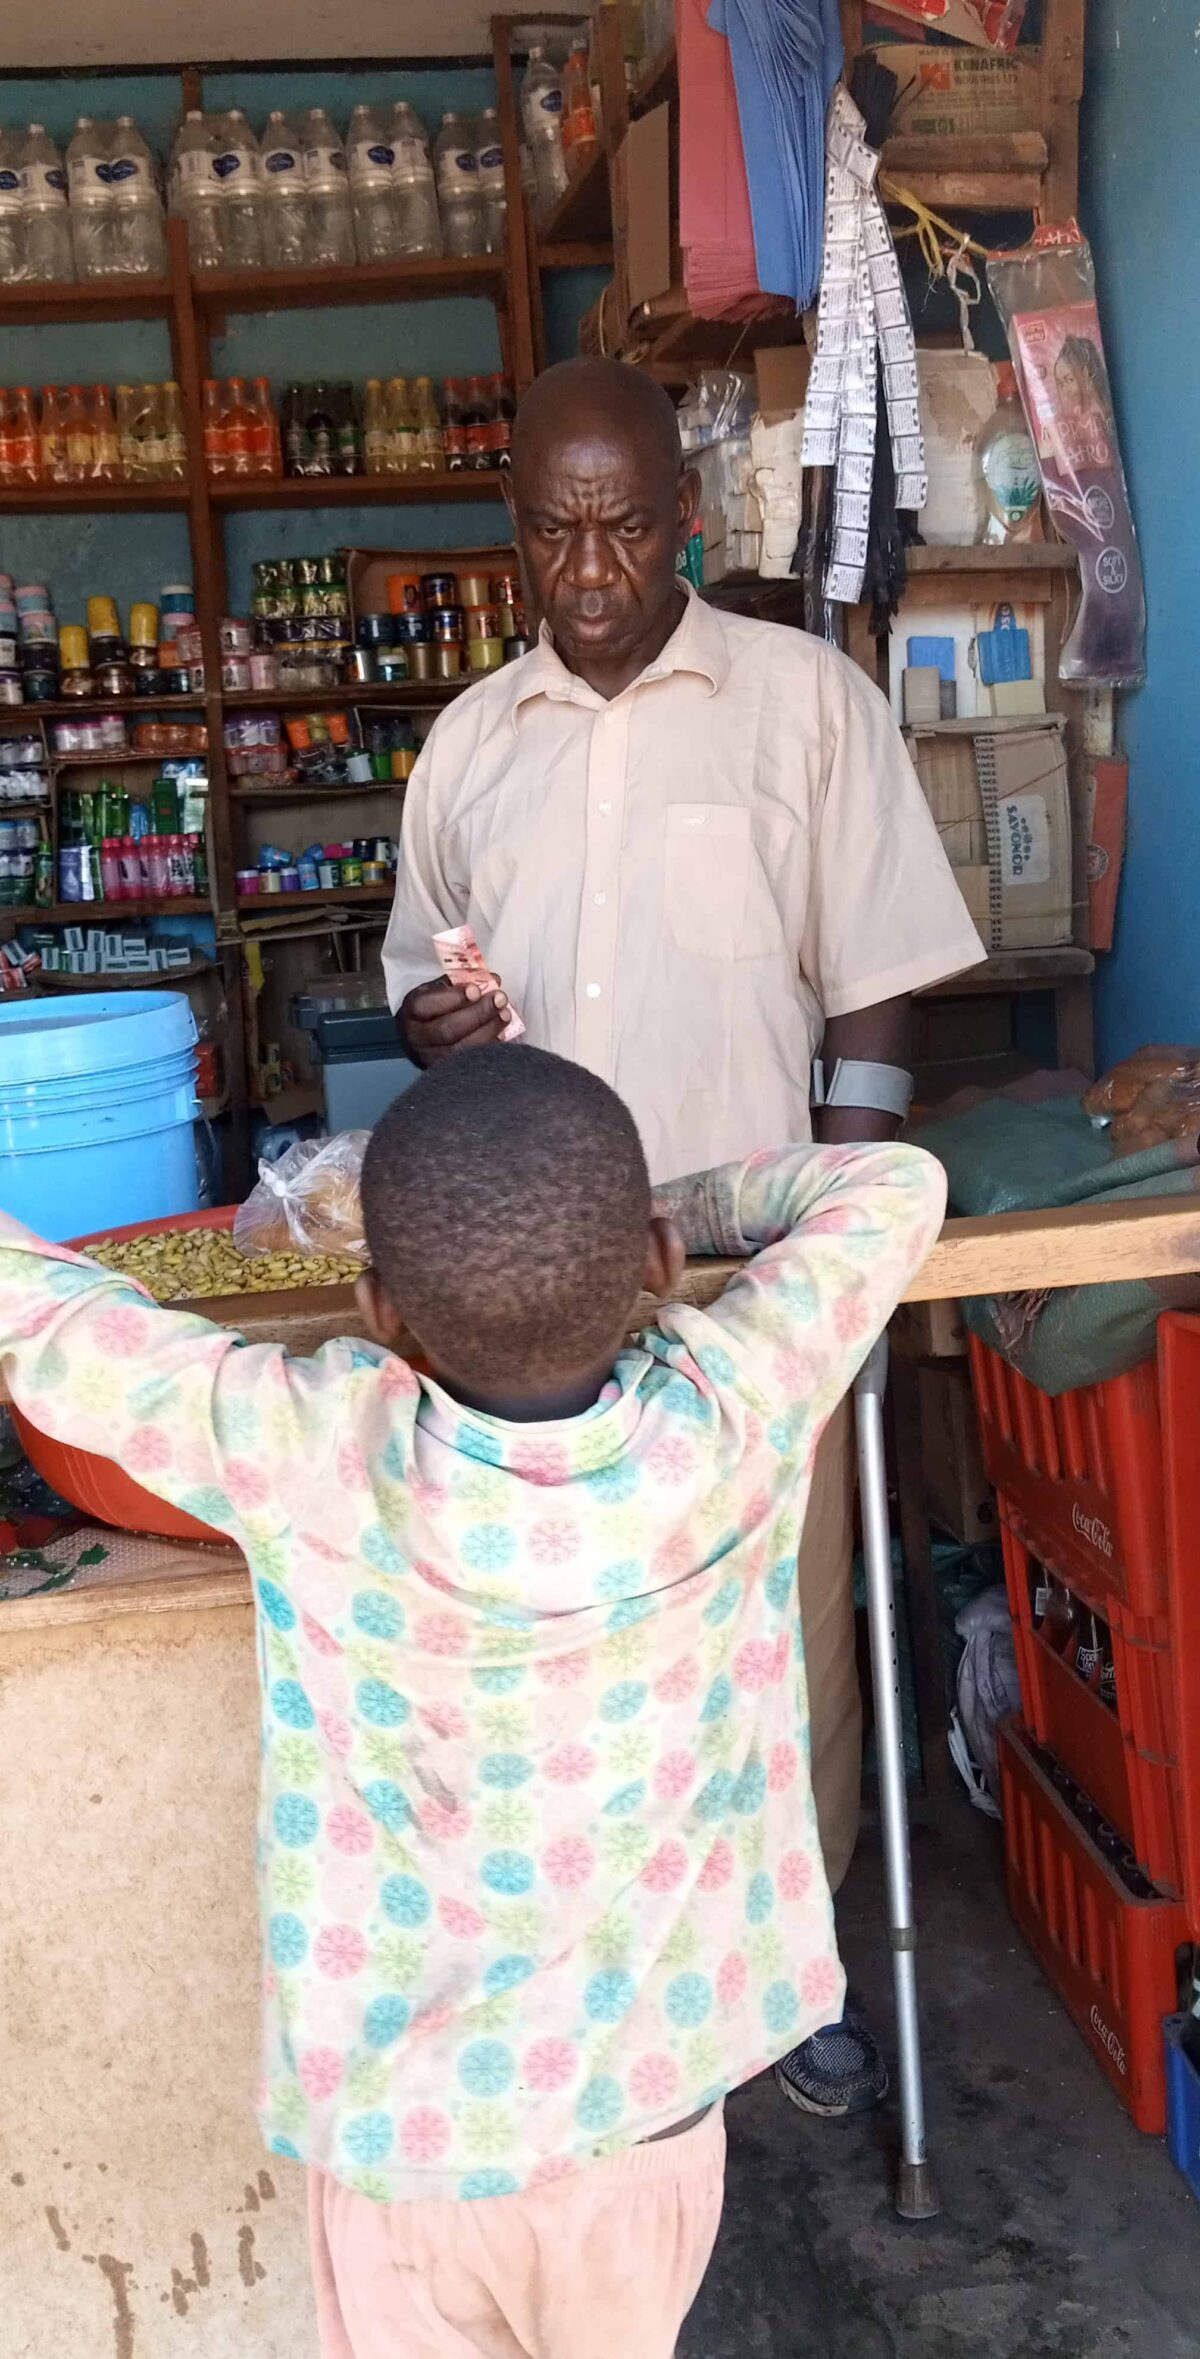 A man stands behind a counter in a store; a young boy looks over the counter on the other side.